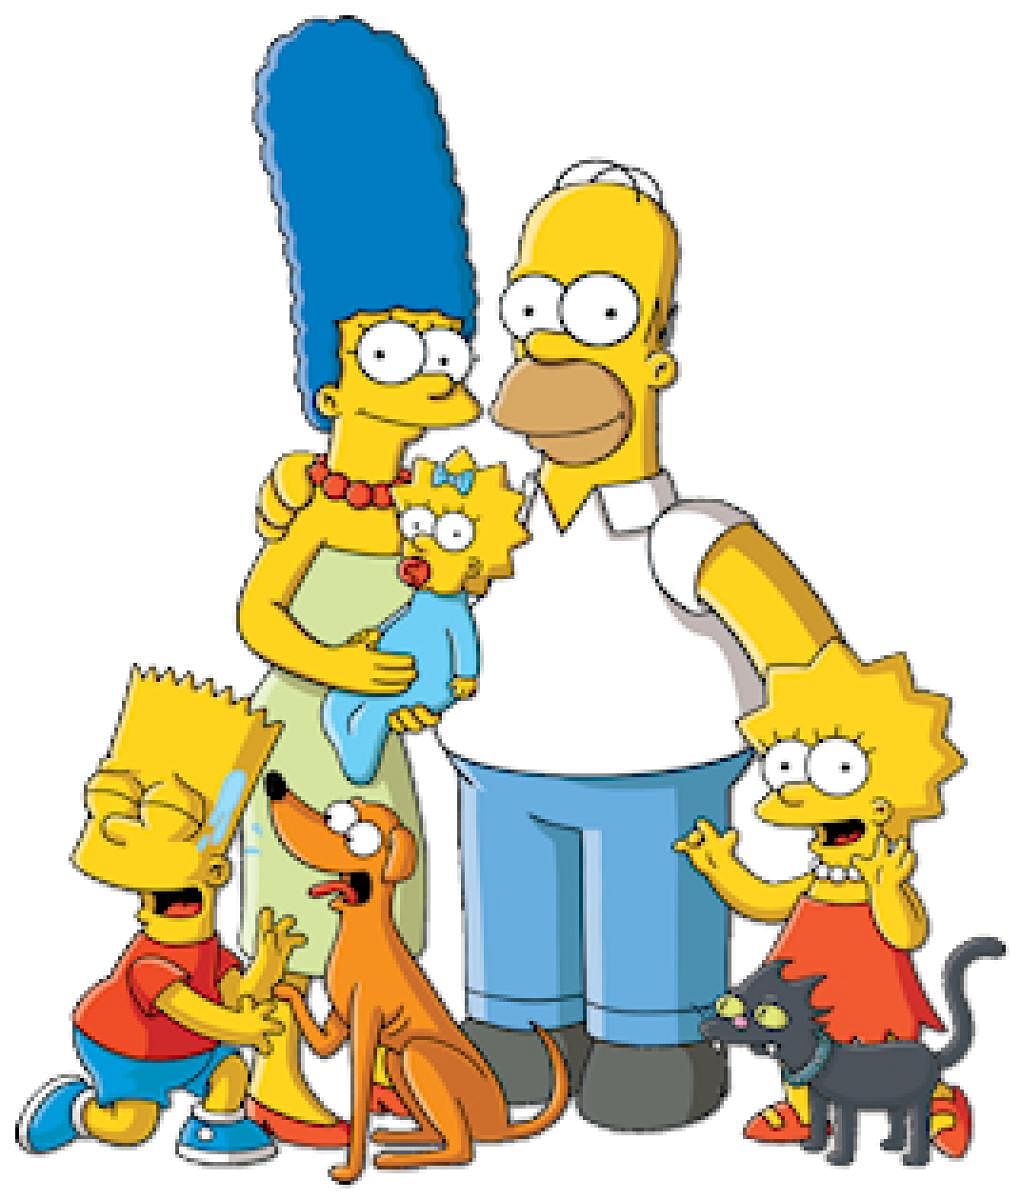 'The Simpsons' has no plans to end: Al Jean